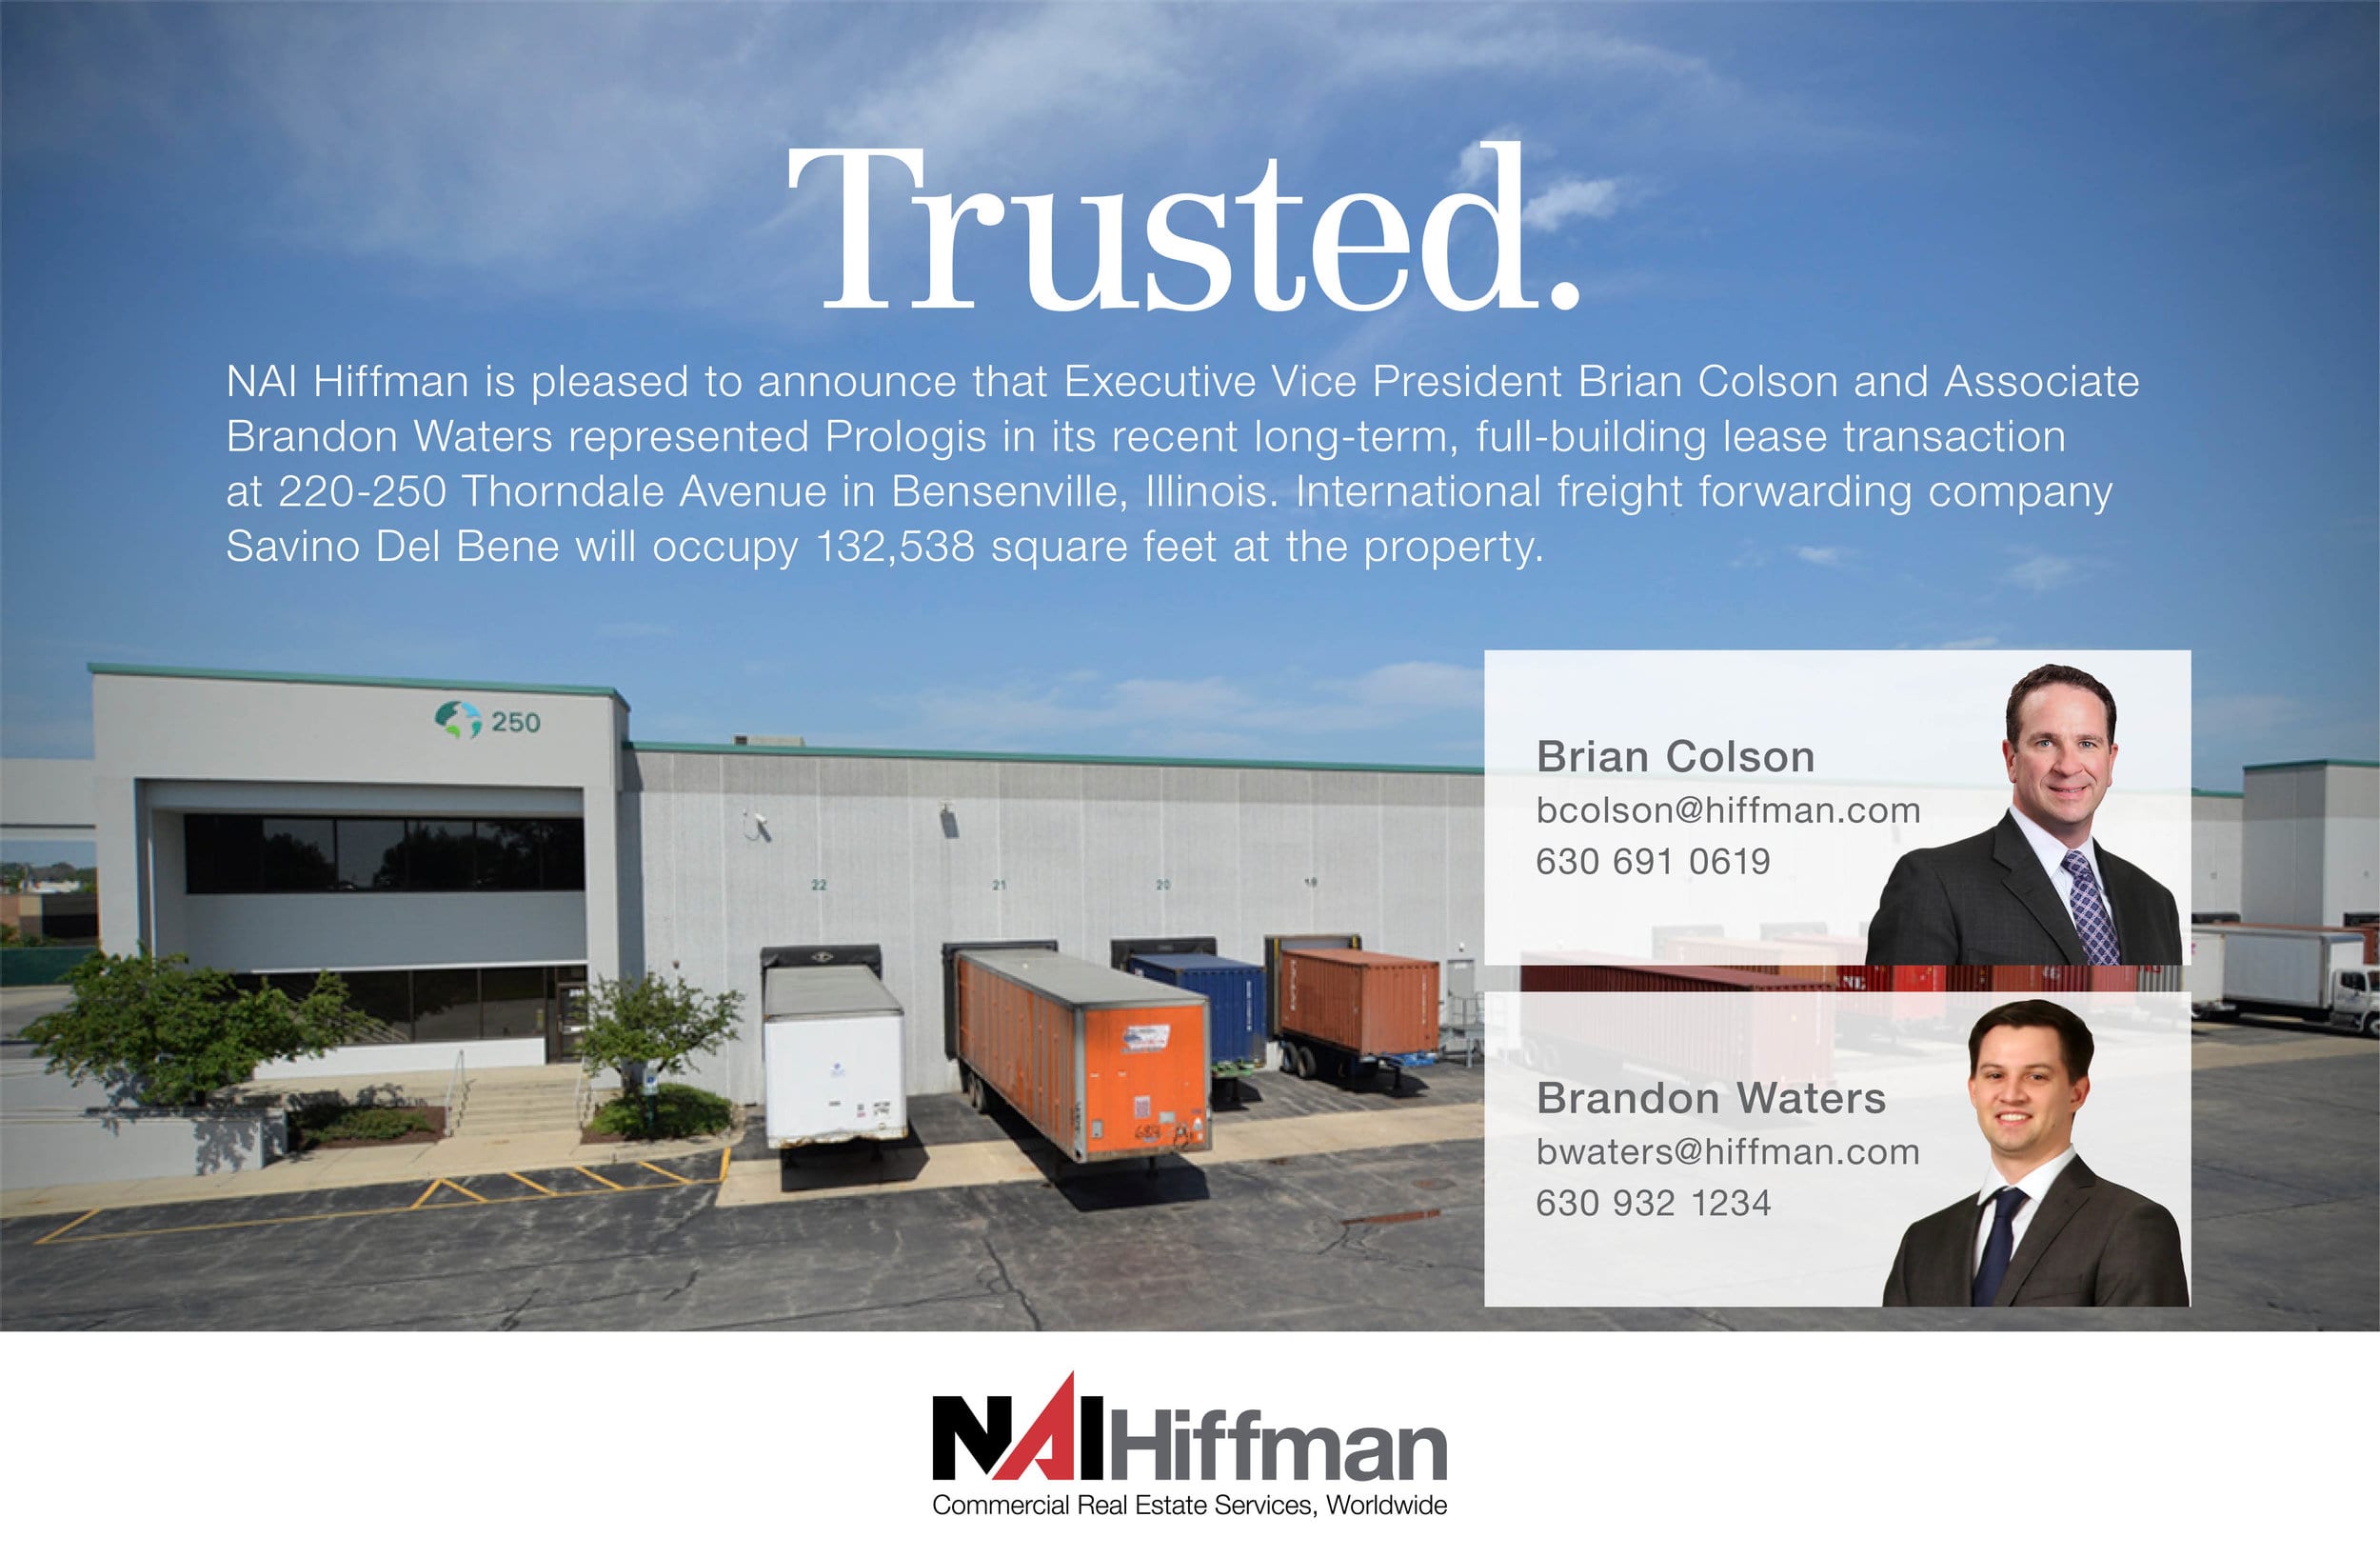 Brian Colson and Brandon Waters represent Prologis in lease transaction